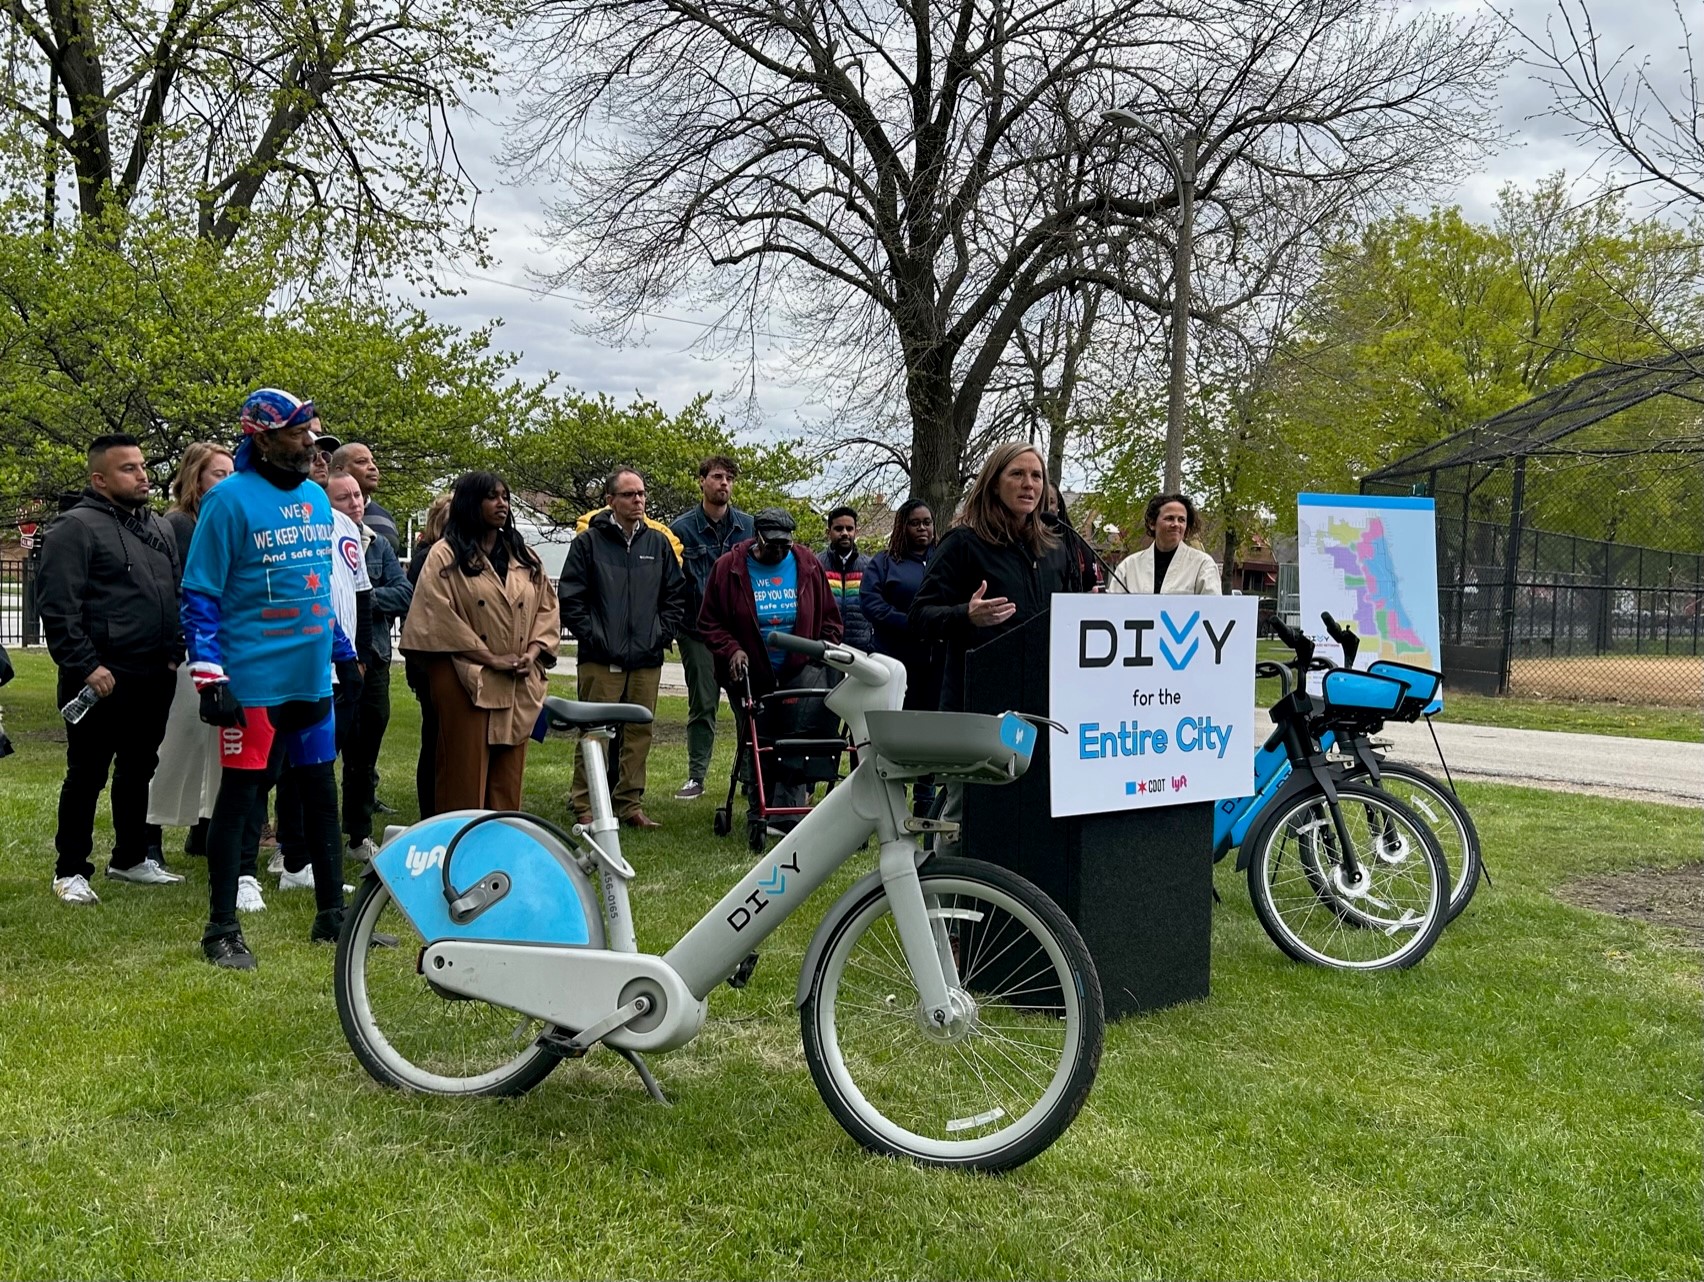 CDOT Commissioner Gia Biagi standing behind a podium, surrounded by community members and Divvy Bikes